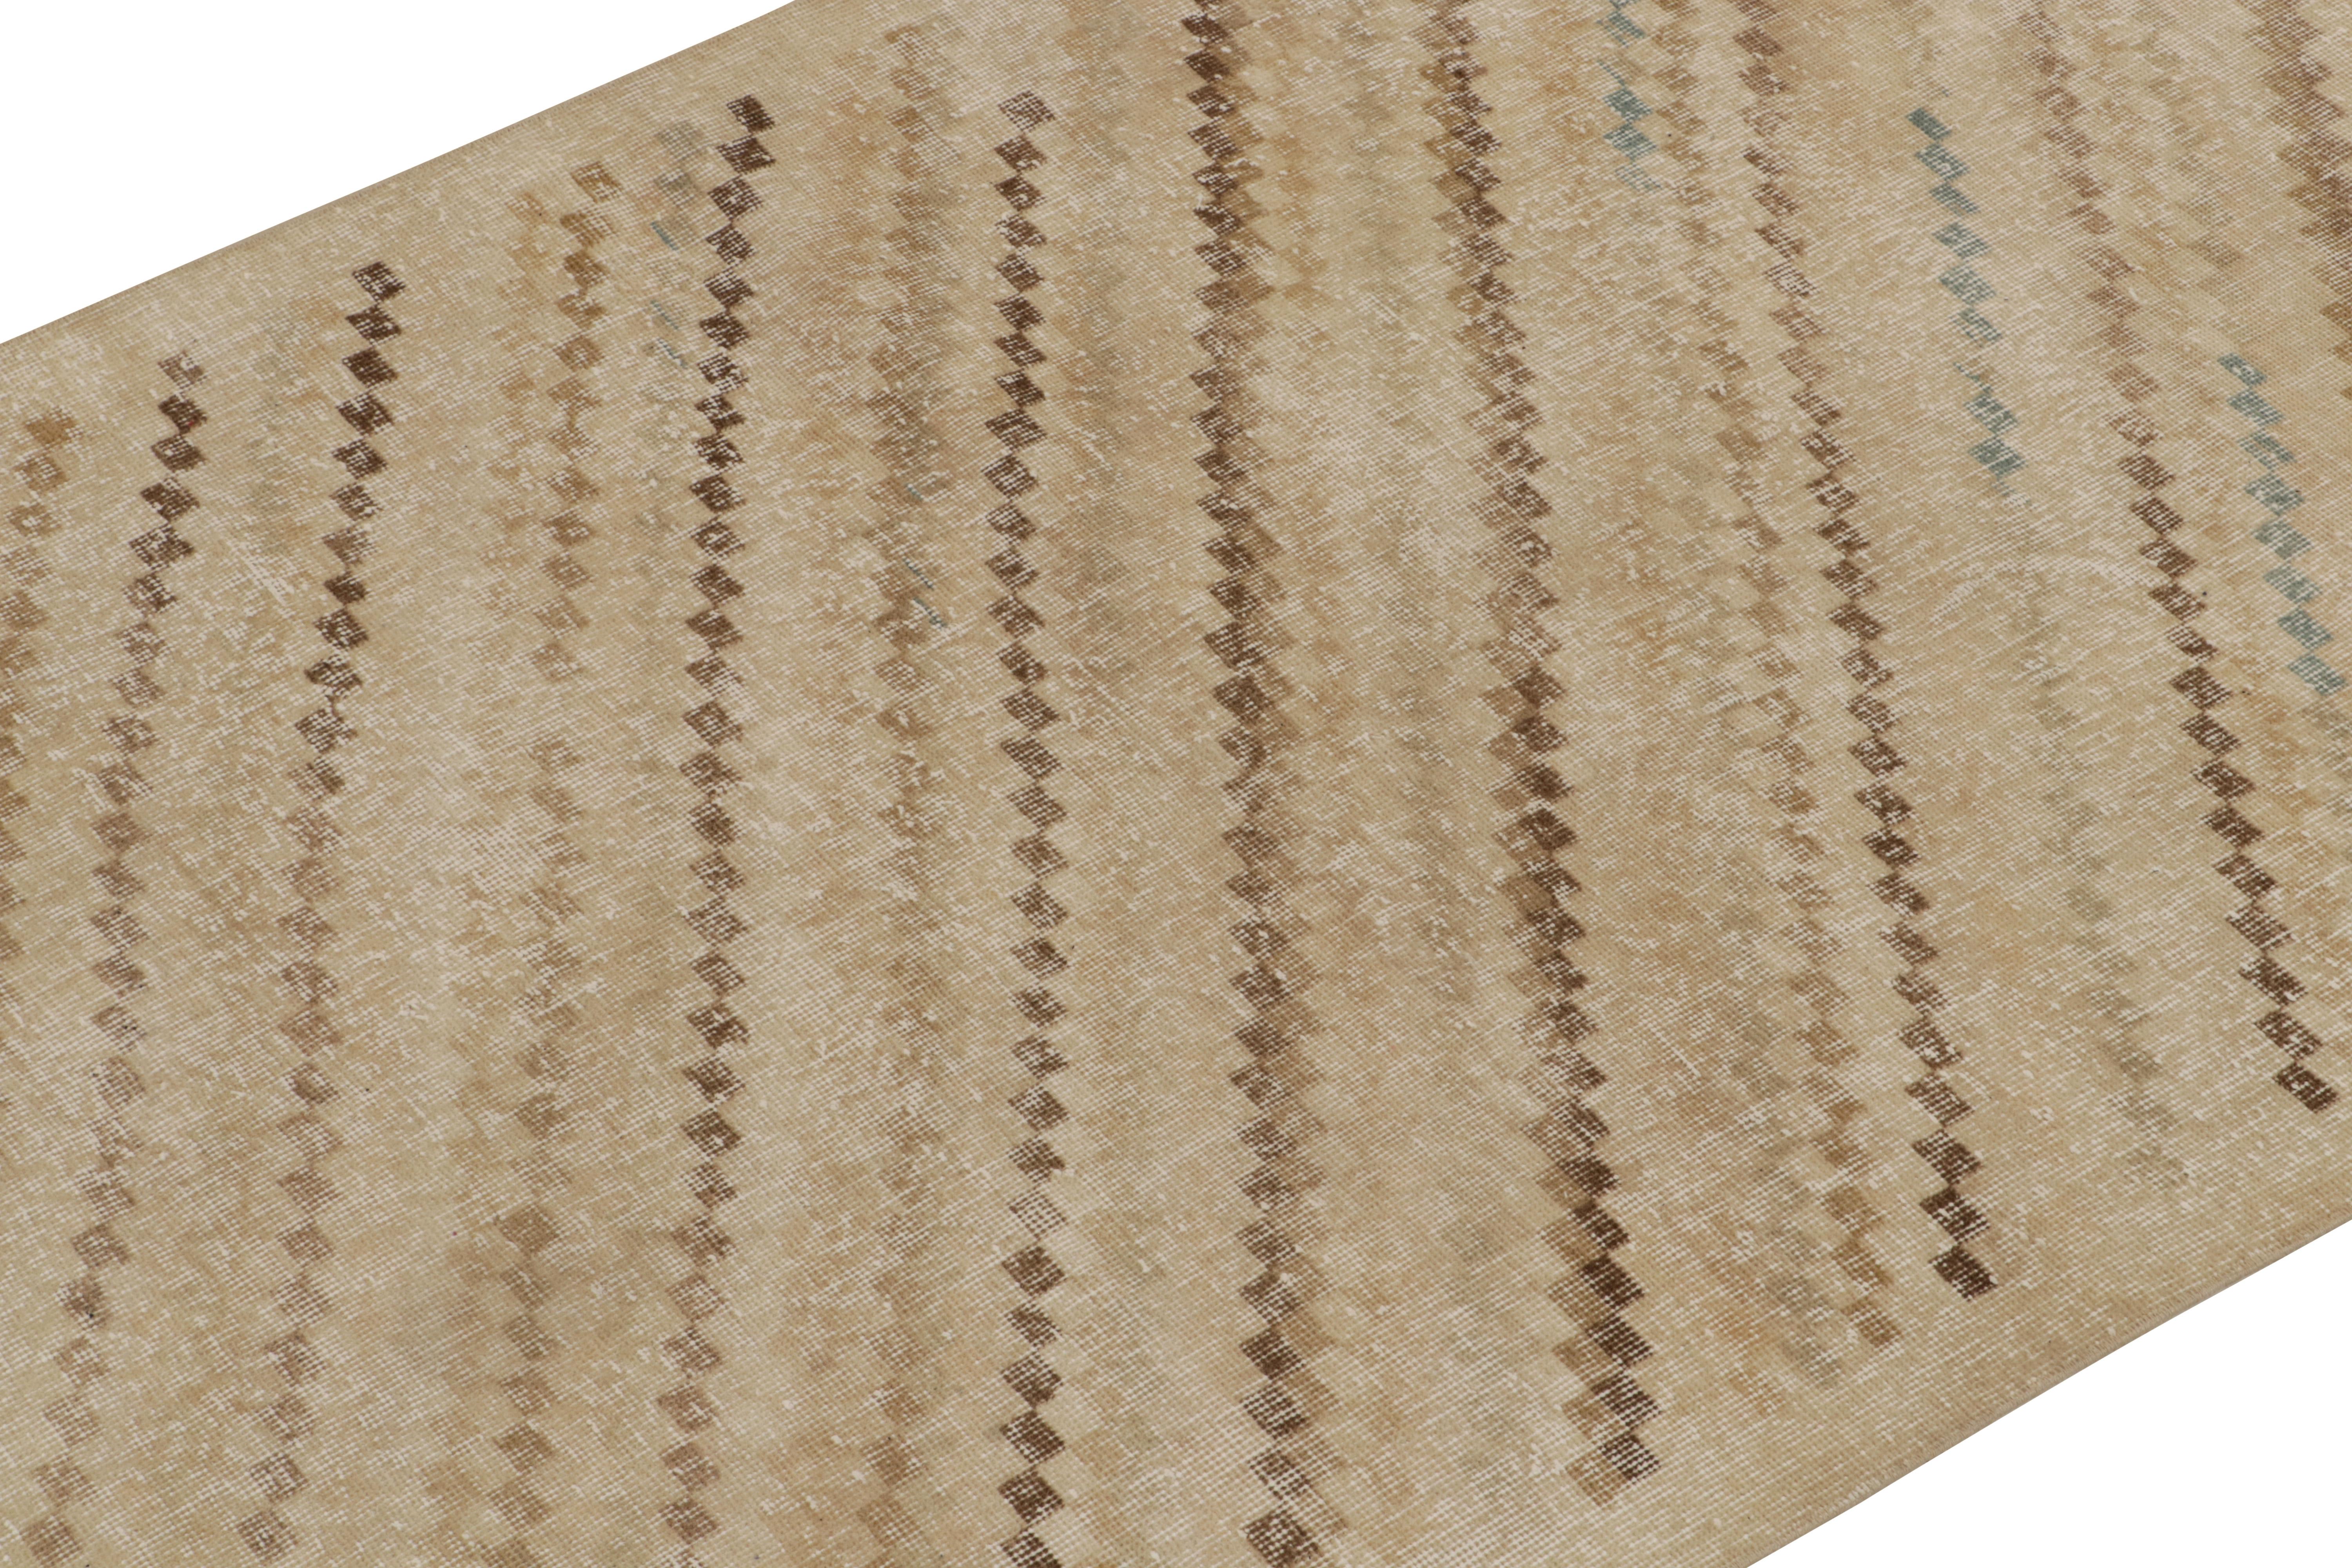 Hand-Knotted 1960s Vintage Distressed Rug in Beige-Brown Geometric Pattern by Rug & Kilim For Sale